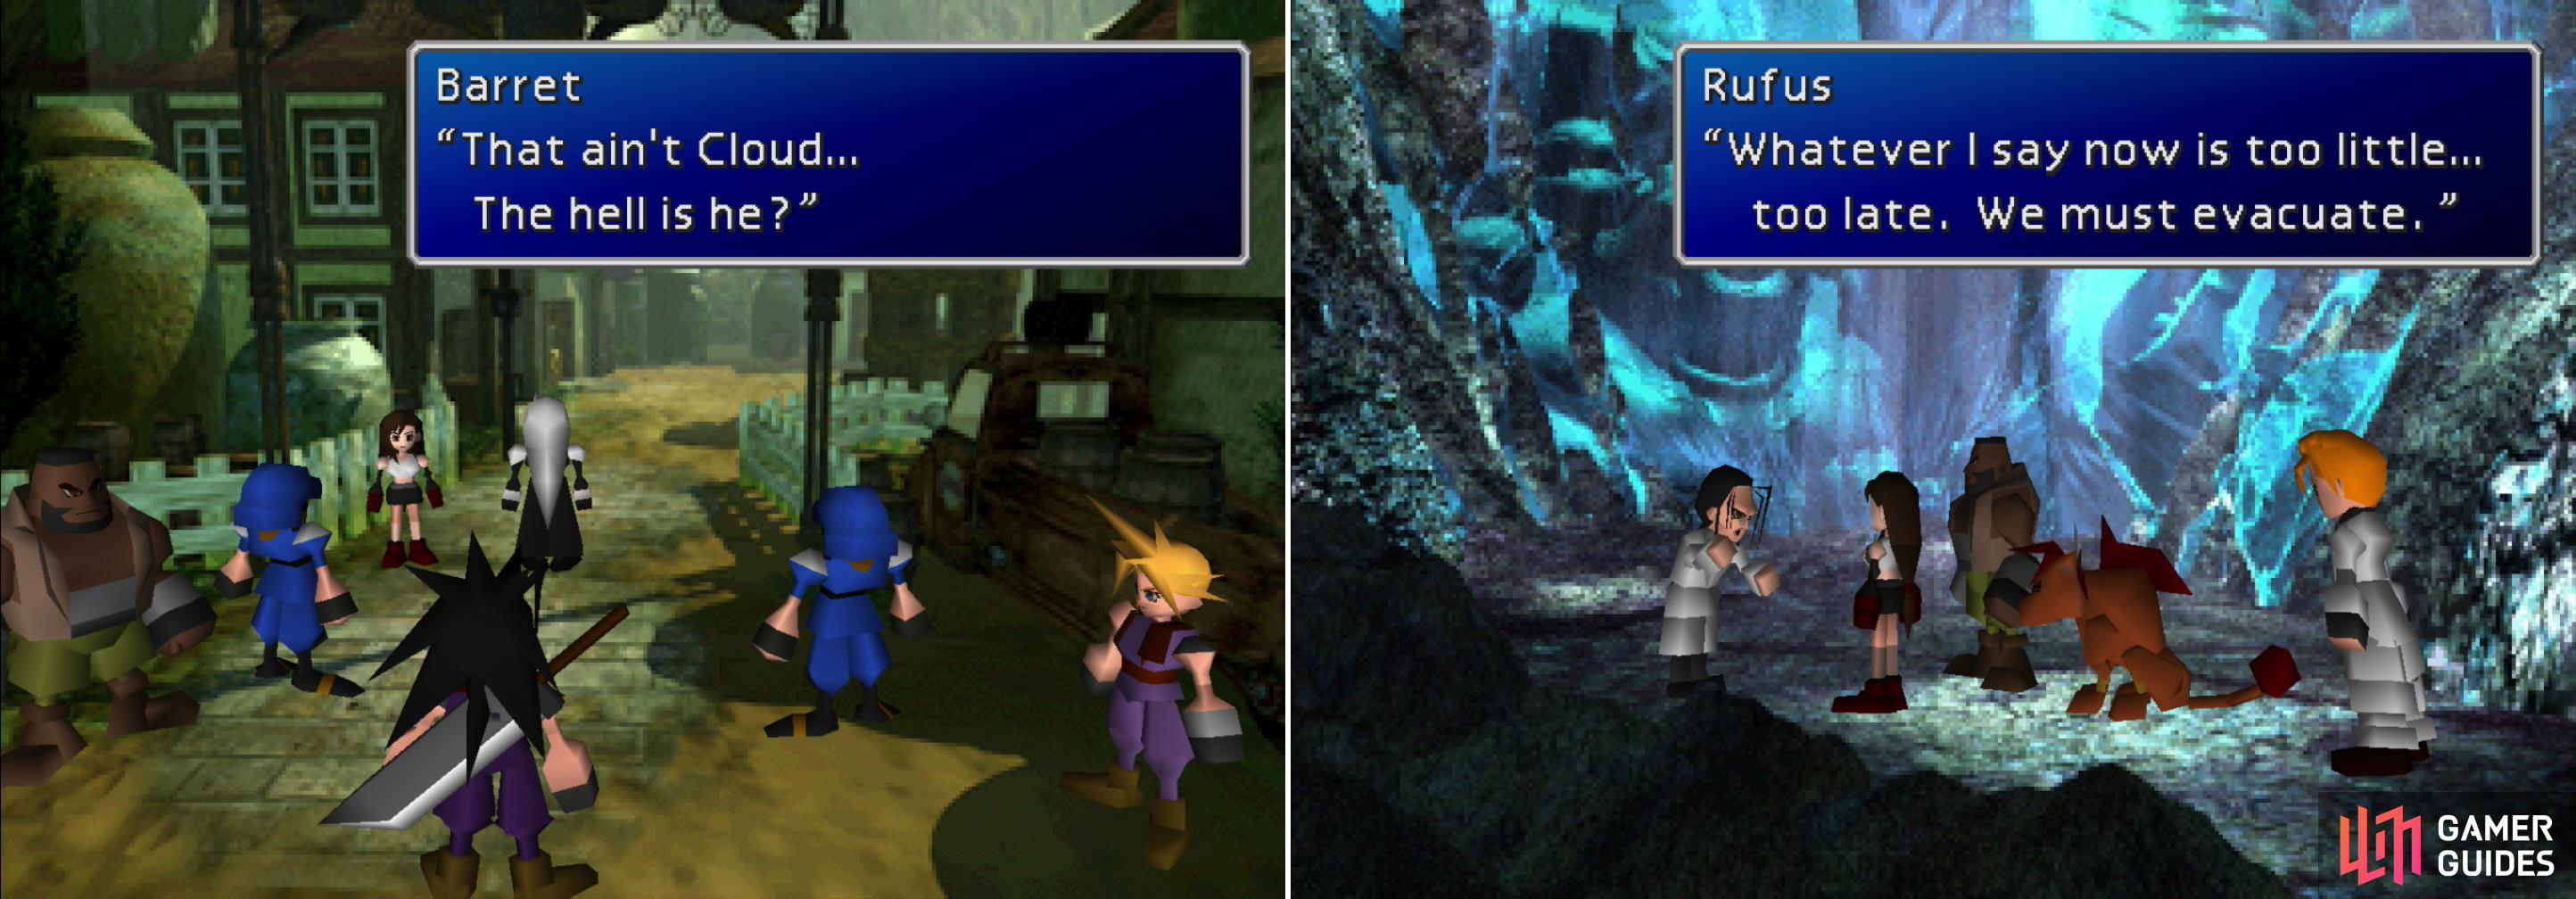 As Cloud closes in on the Promised Land, Sephiroth plays mind tricks with him by showing him illusions that call his past into question (left). After Cloud’s encounter with Sephiroth, the party and Shinra make odd bed-fellows (right).